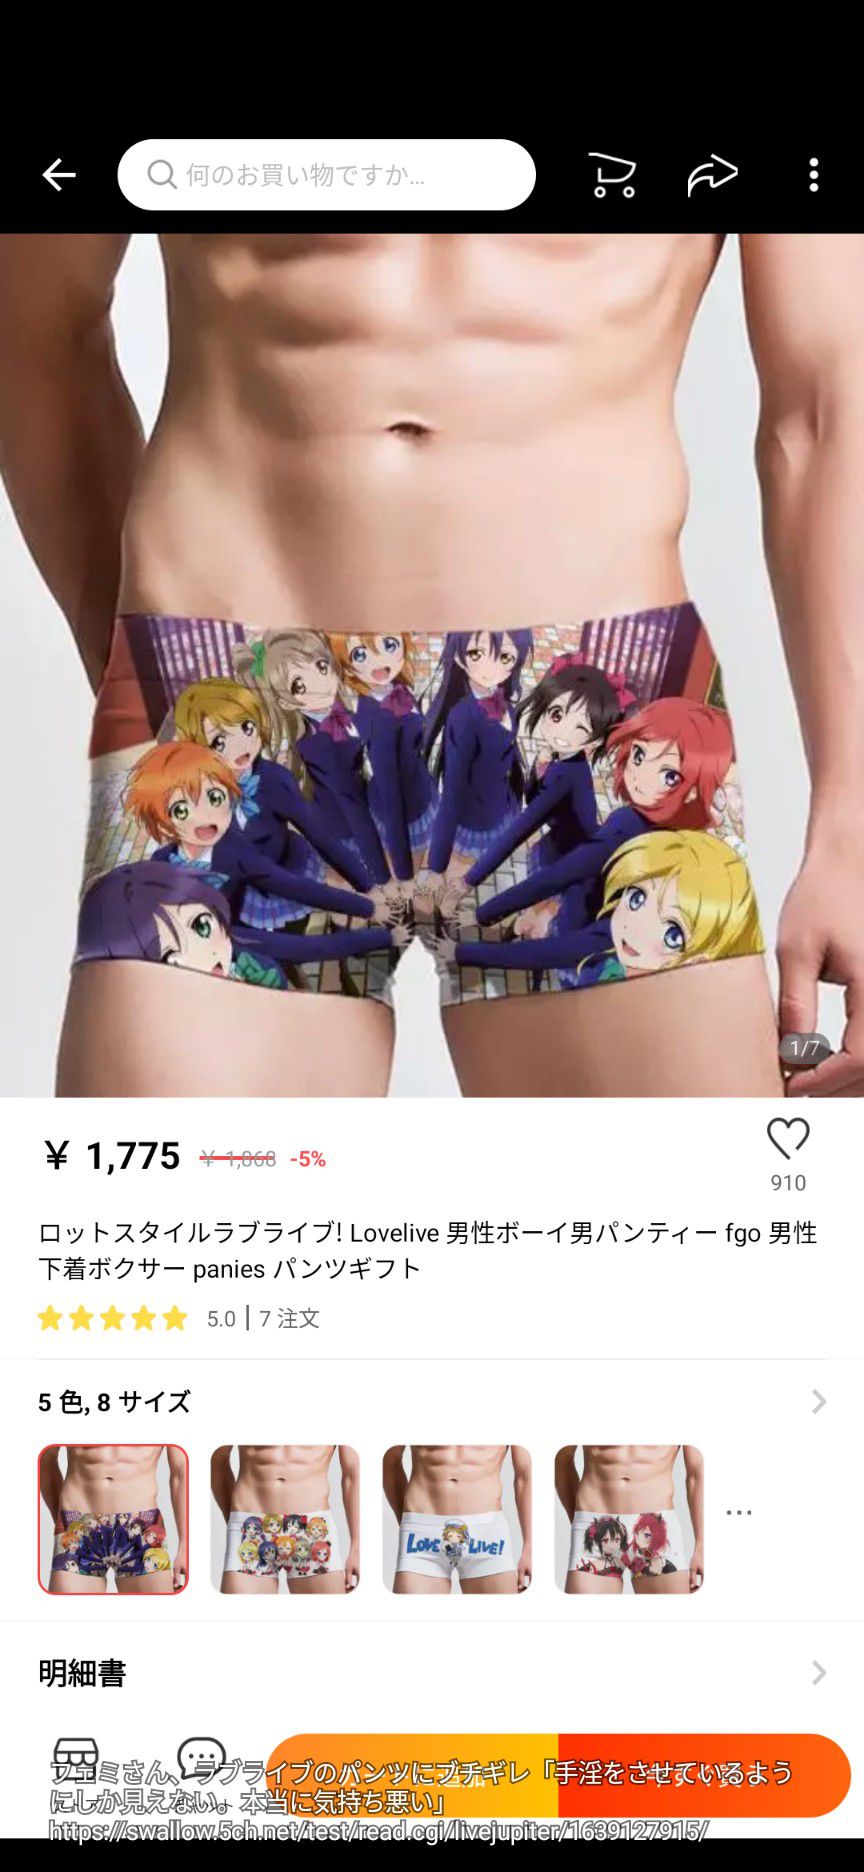 Femi-san, love live pants with buchigire "it only looks like you're making you get indecent, it's really sickening" 2